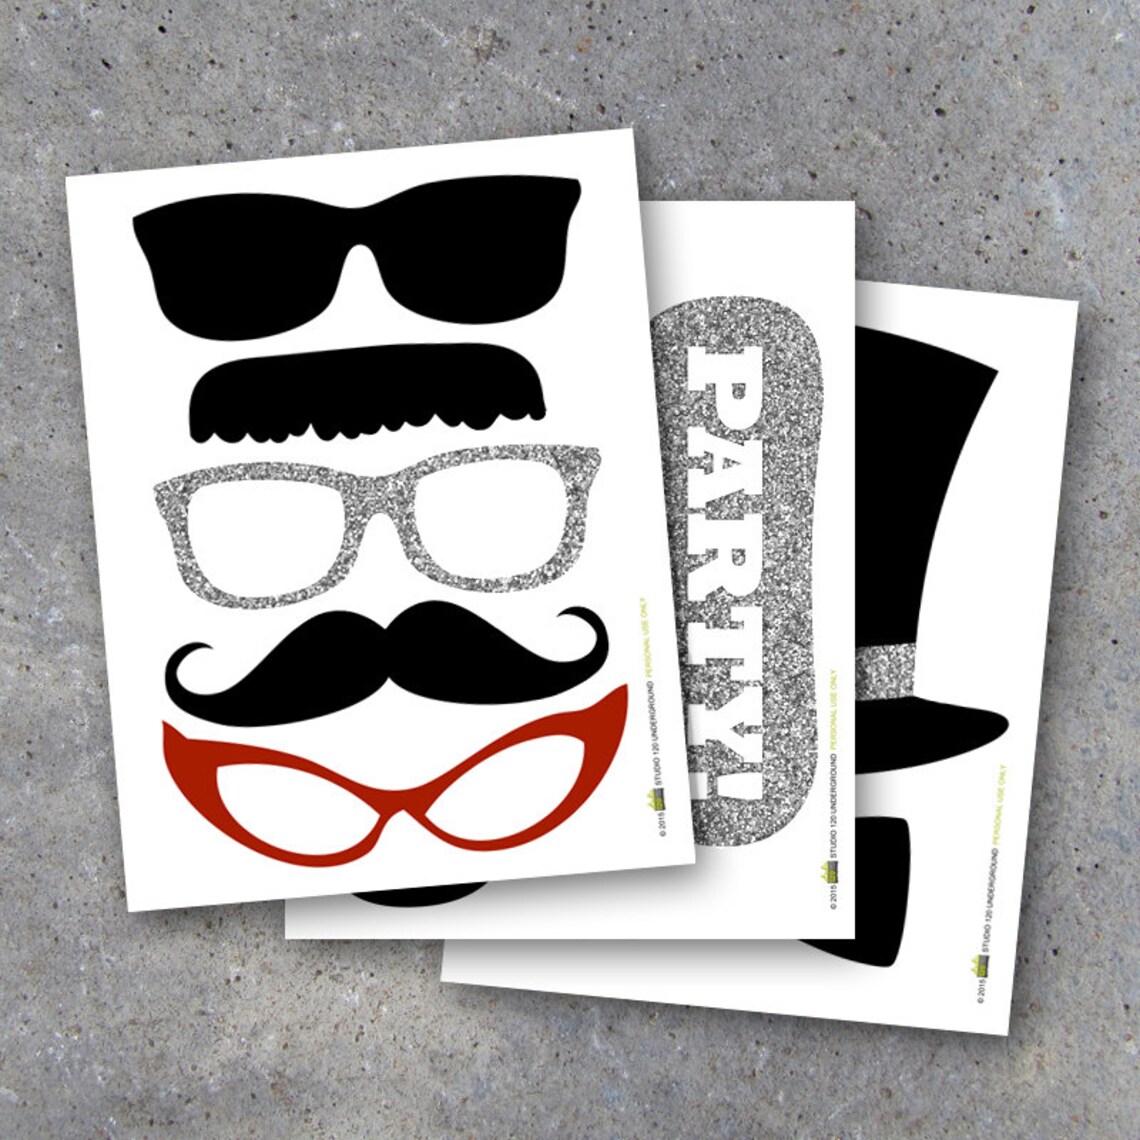 2021 Graduation Photo Booth Props Collection Printable Etsy